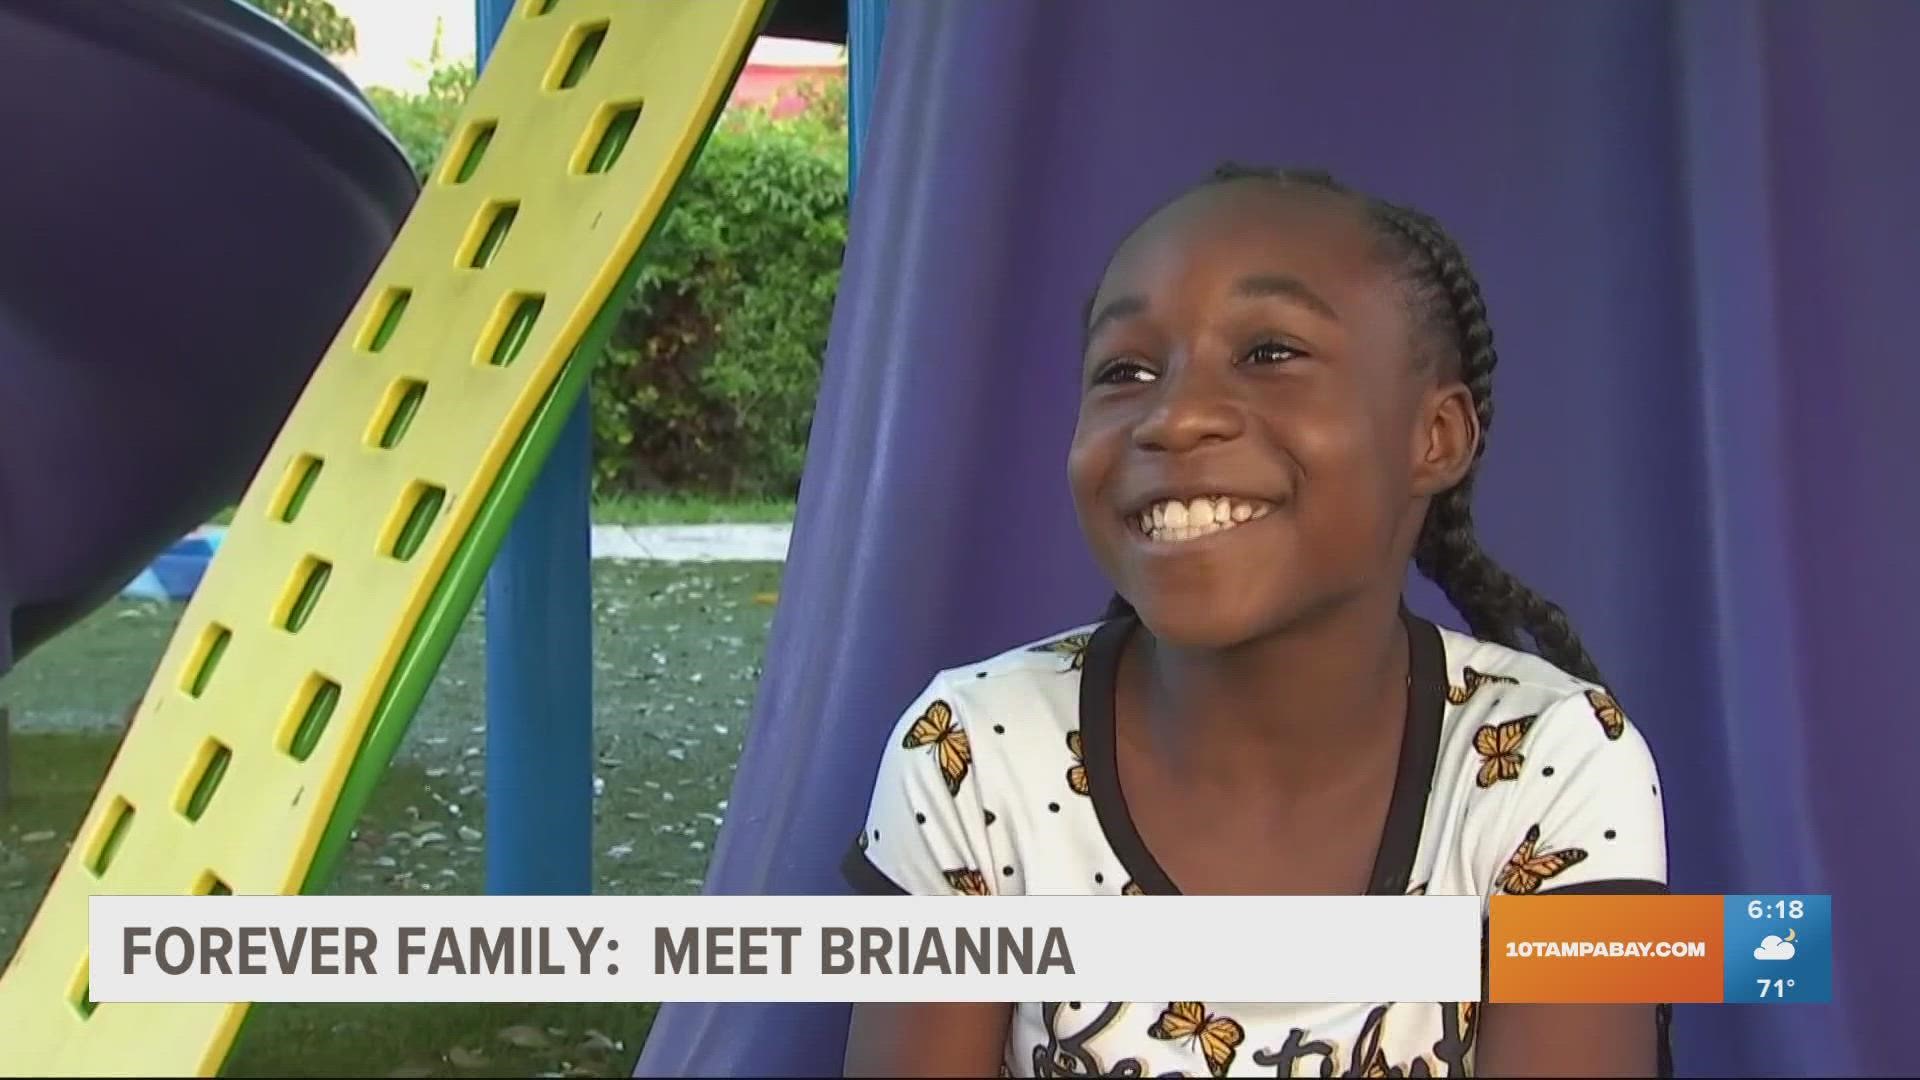 10-year-old Brianna is charismatic and she already knows that to have a family is to have a gift. Adoption from foster care is free.